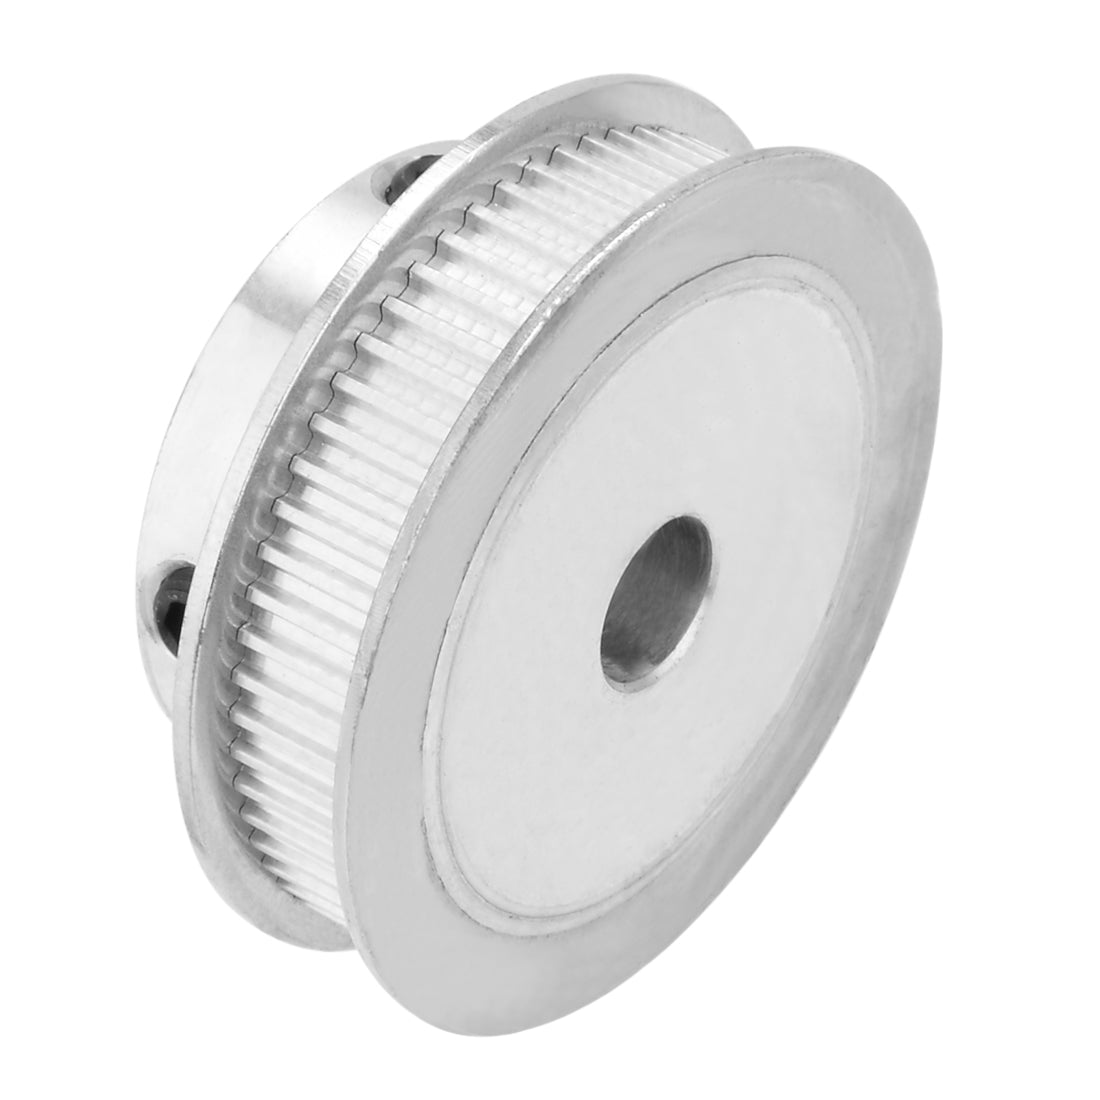 uxcell Uxcell Aluminum 60 Teeth 8mm Bore 2.032mm Pitch Timing Belt Pulley for 6mm Belt